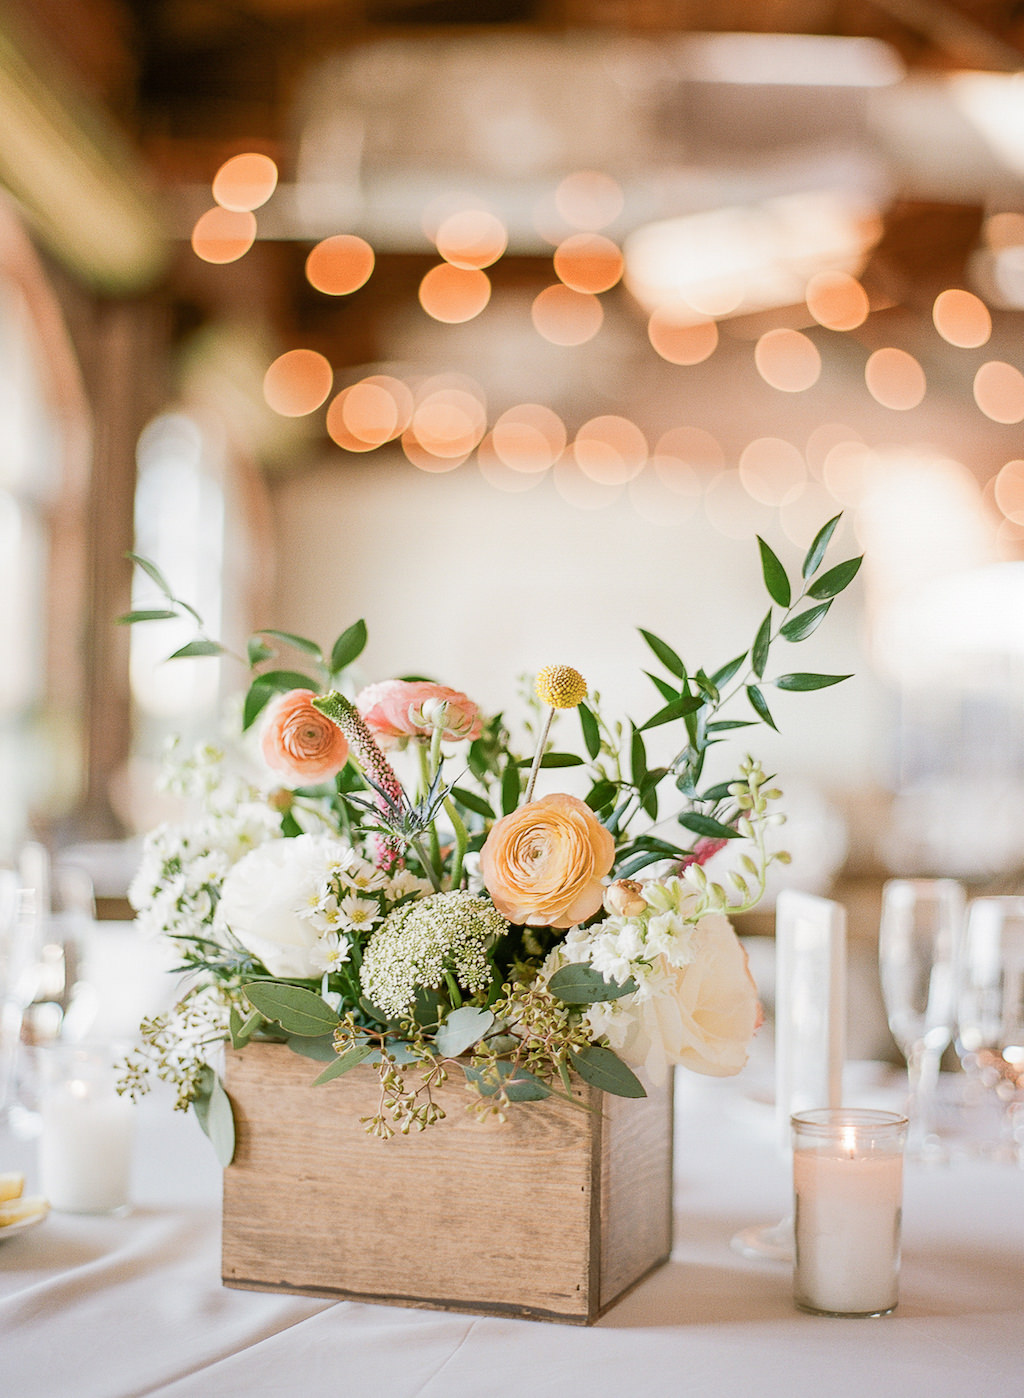 Rustic Wedding Reception Table Decor with Peach and Coral Floral with Wild Greenery in Wooden Box Small Centerpiece